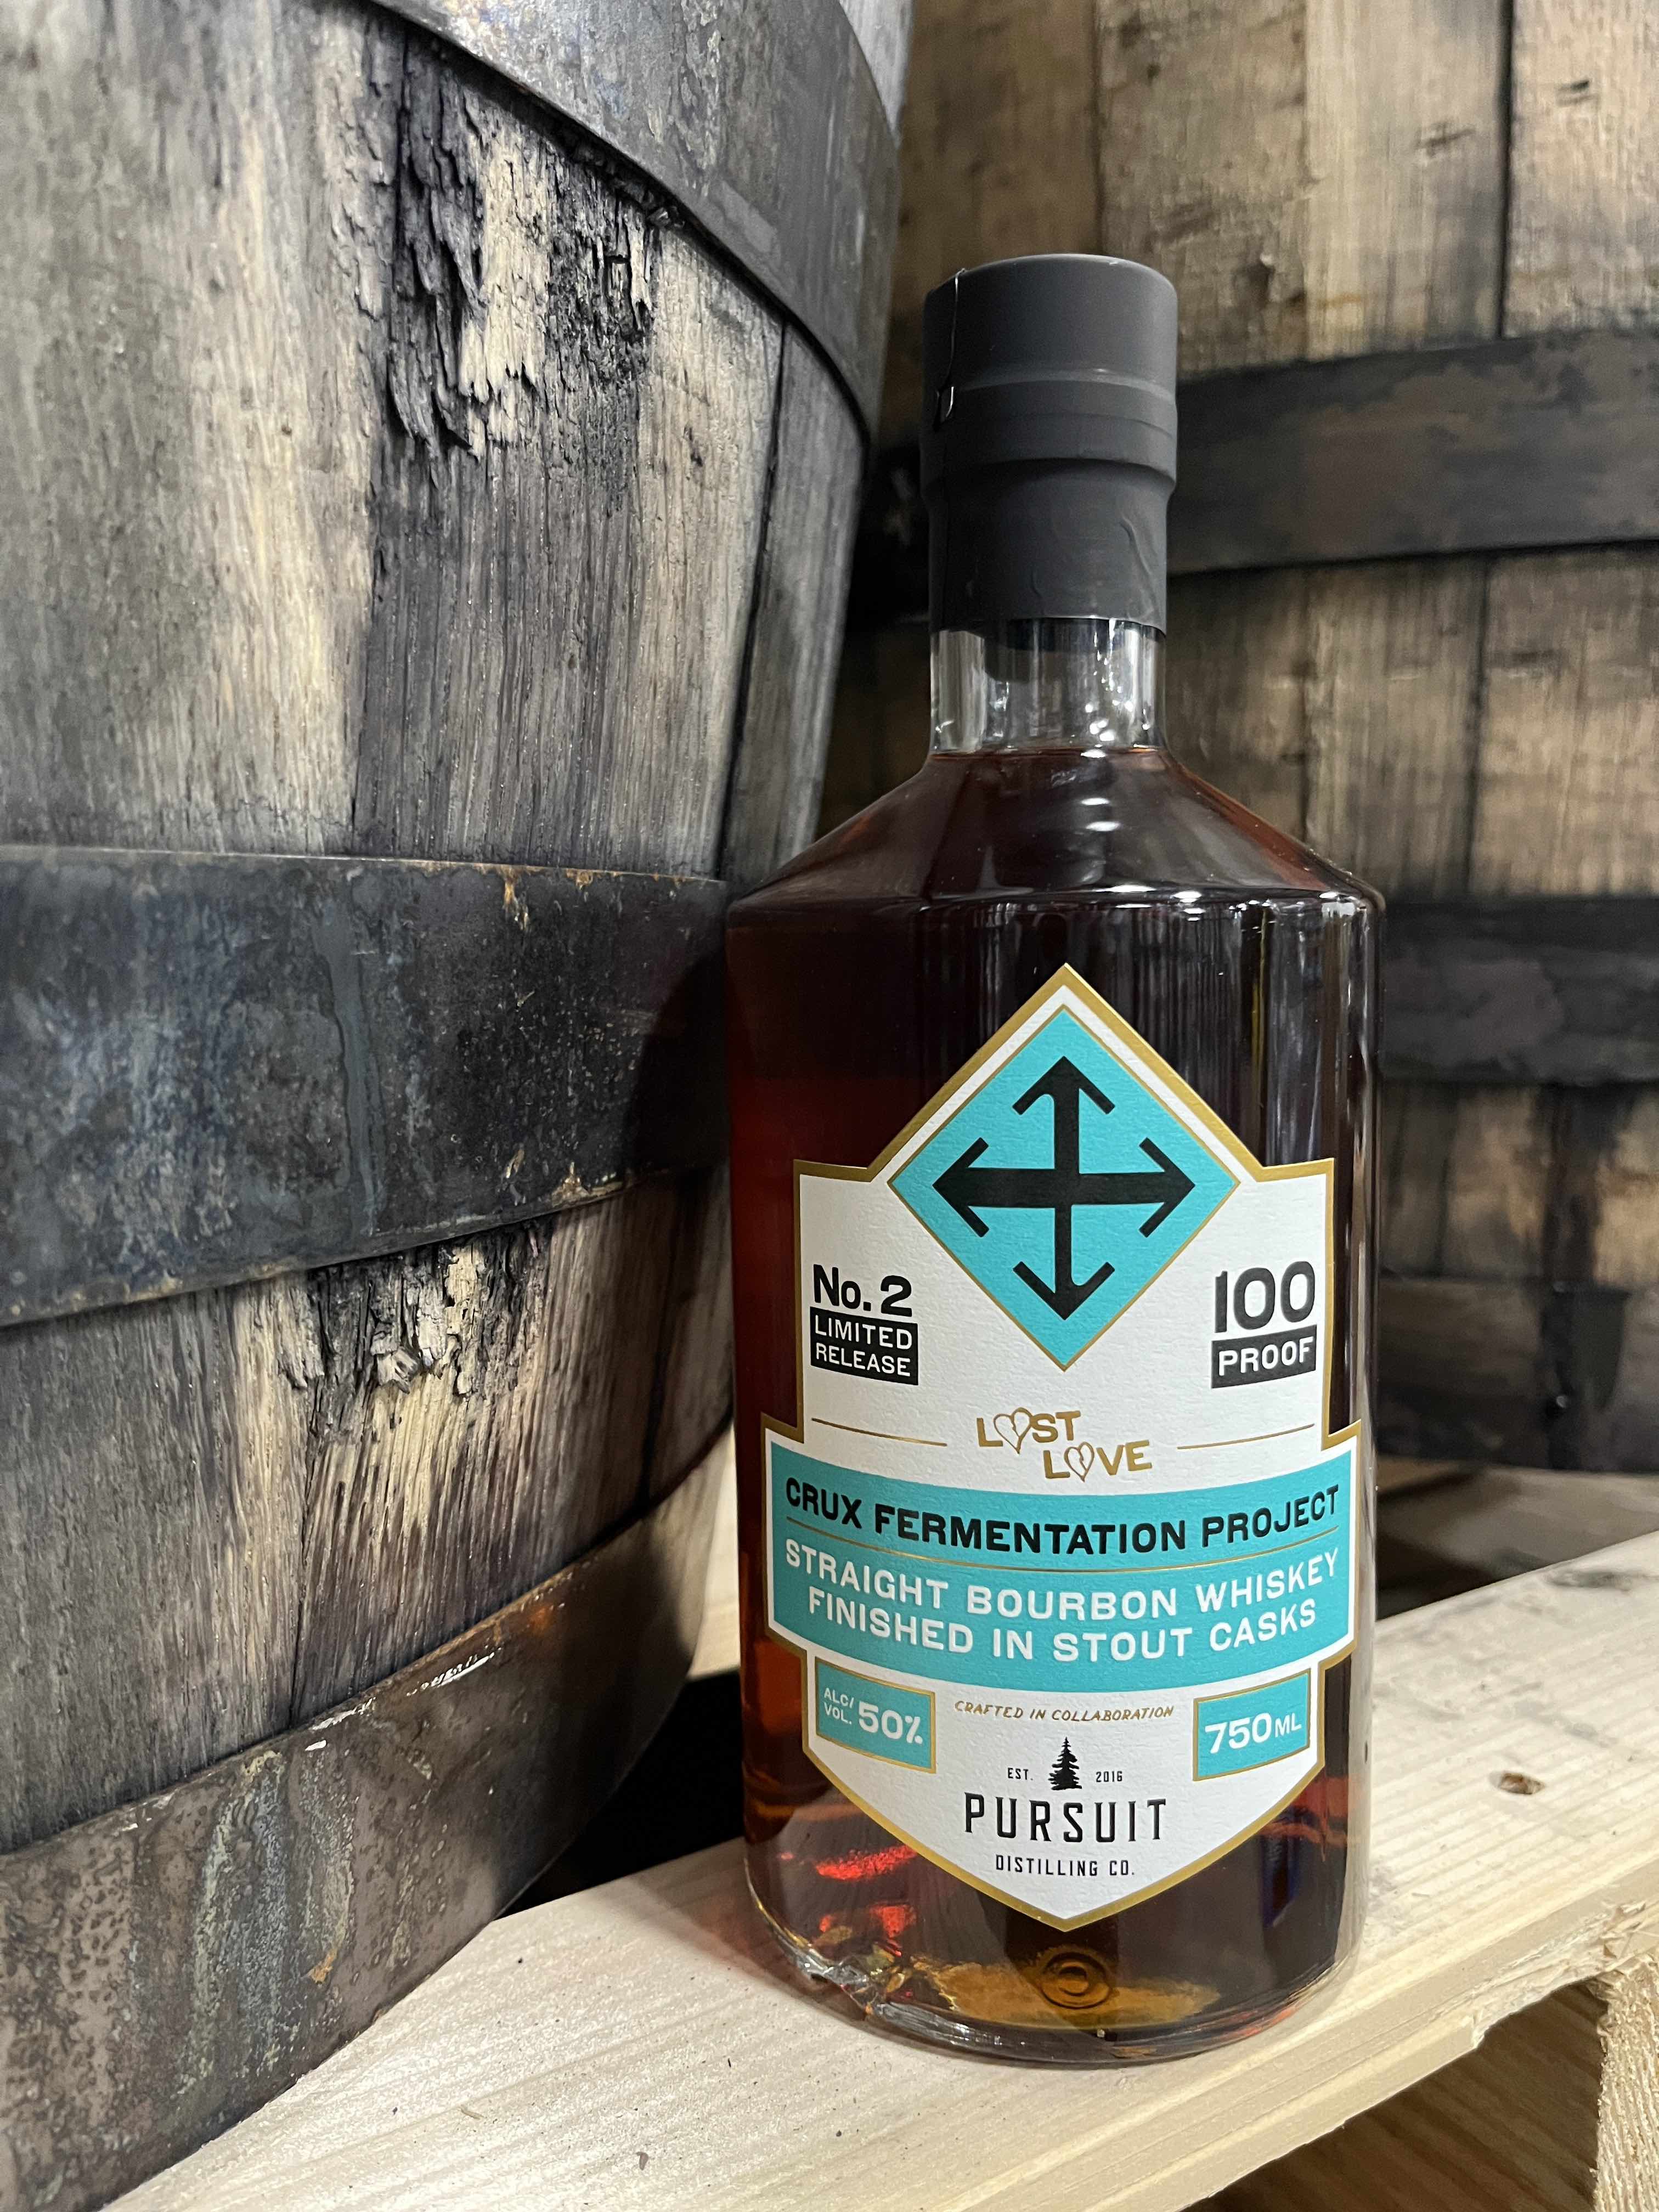 image of Crux Fermentation Project Releases Straight Bourbon Whiskey No. 2 courtesy of Crux Fermentation Project